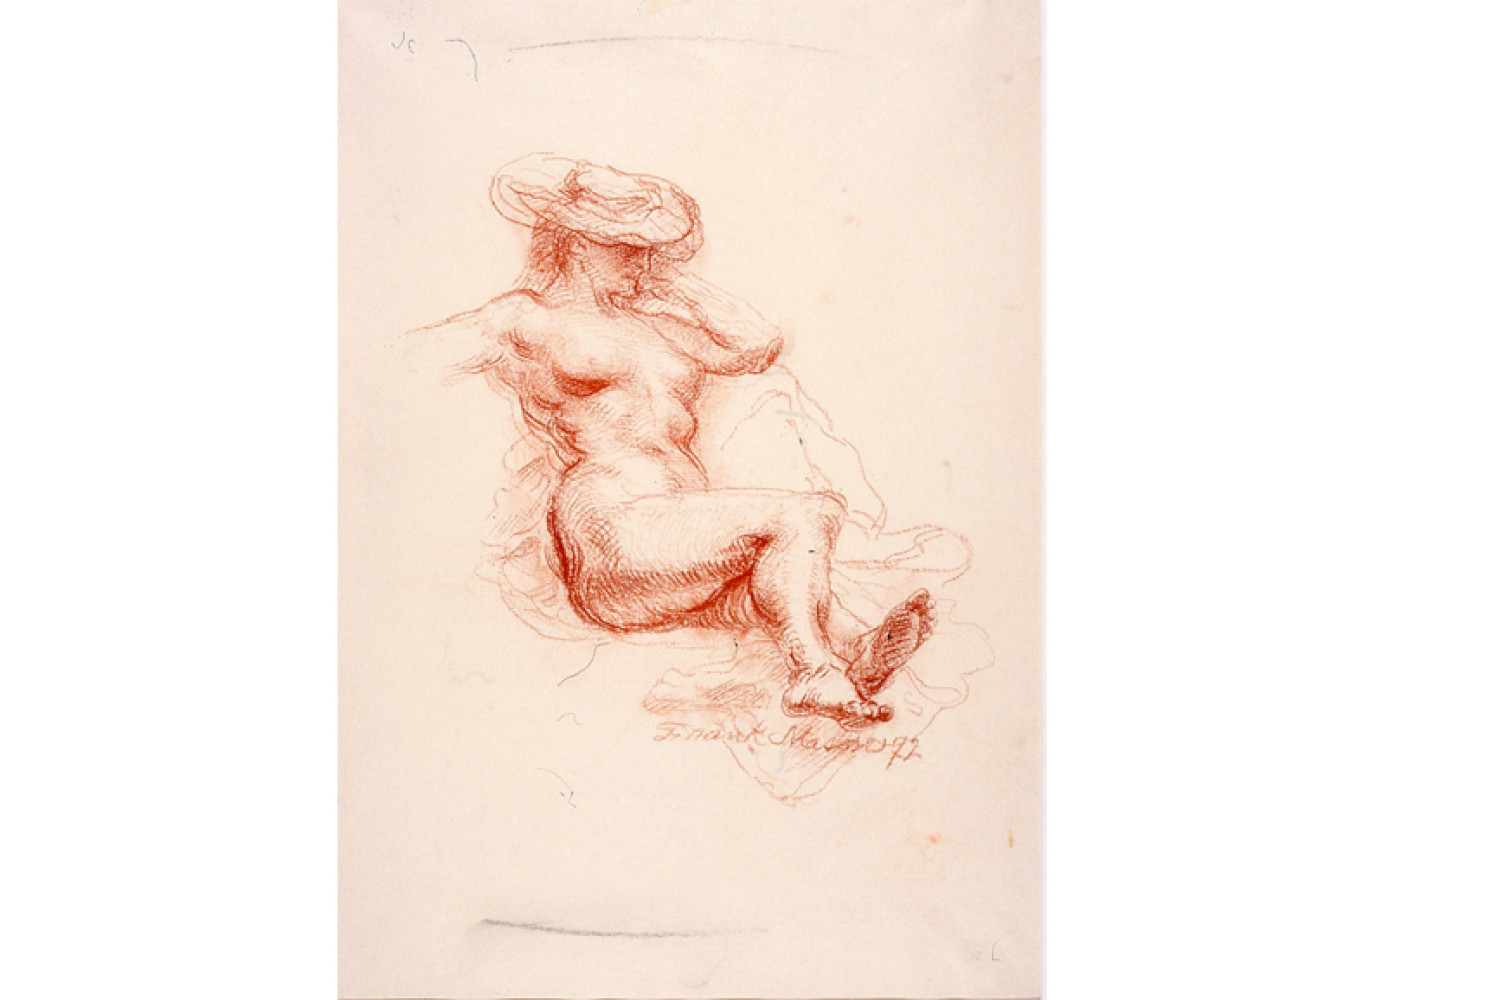 Reclining Sunbather, 1972, By Frank Mason (American, 1921—2009); Sepia on cream paper; 20 5/8 x 15 inches; Courtesy of the Estate of Frank Mason; D091
